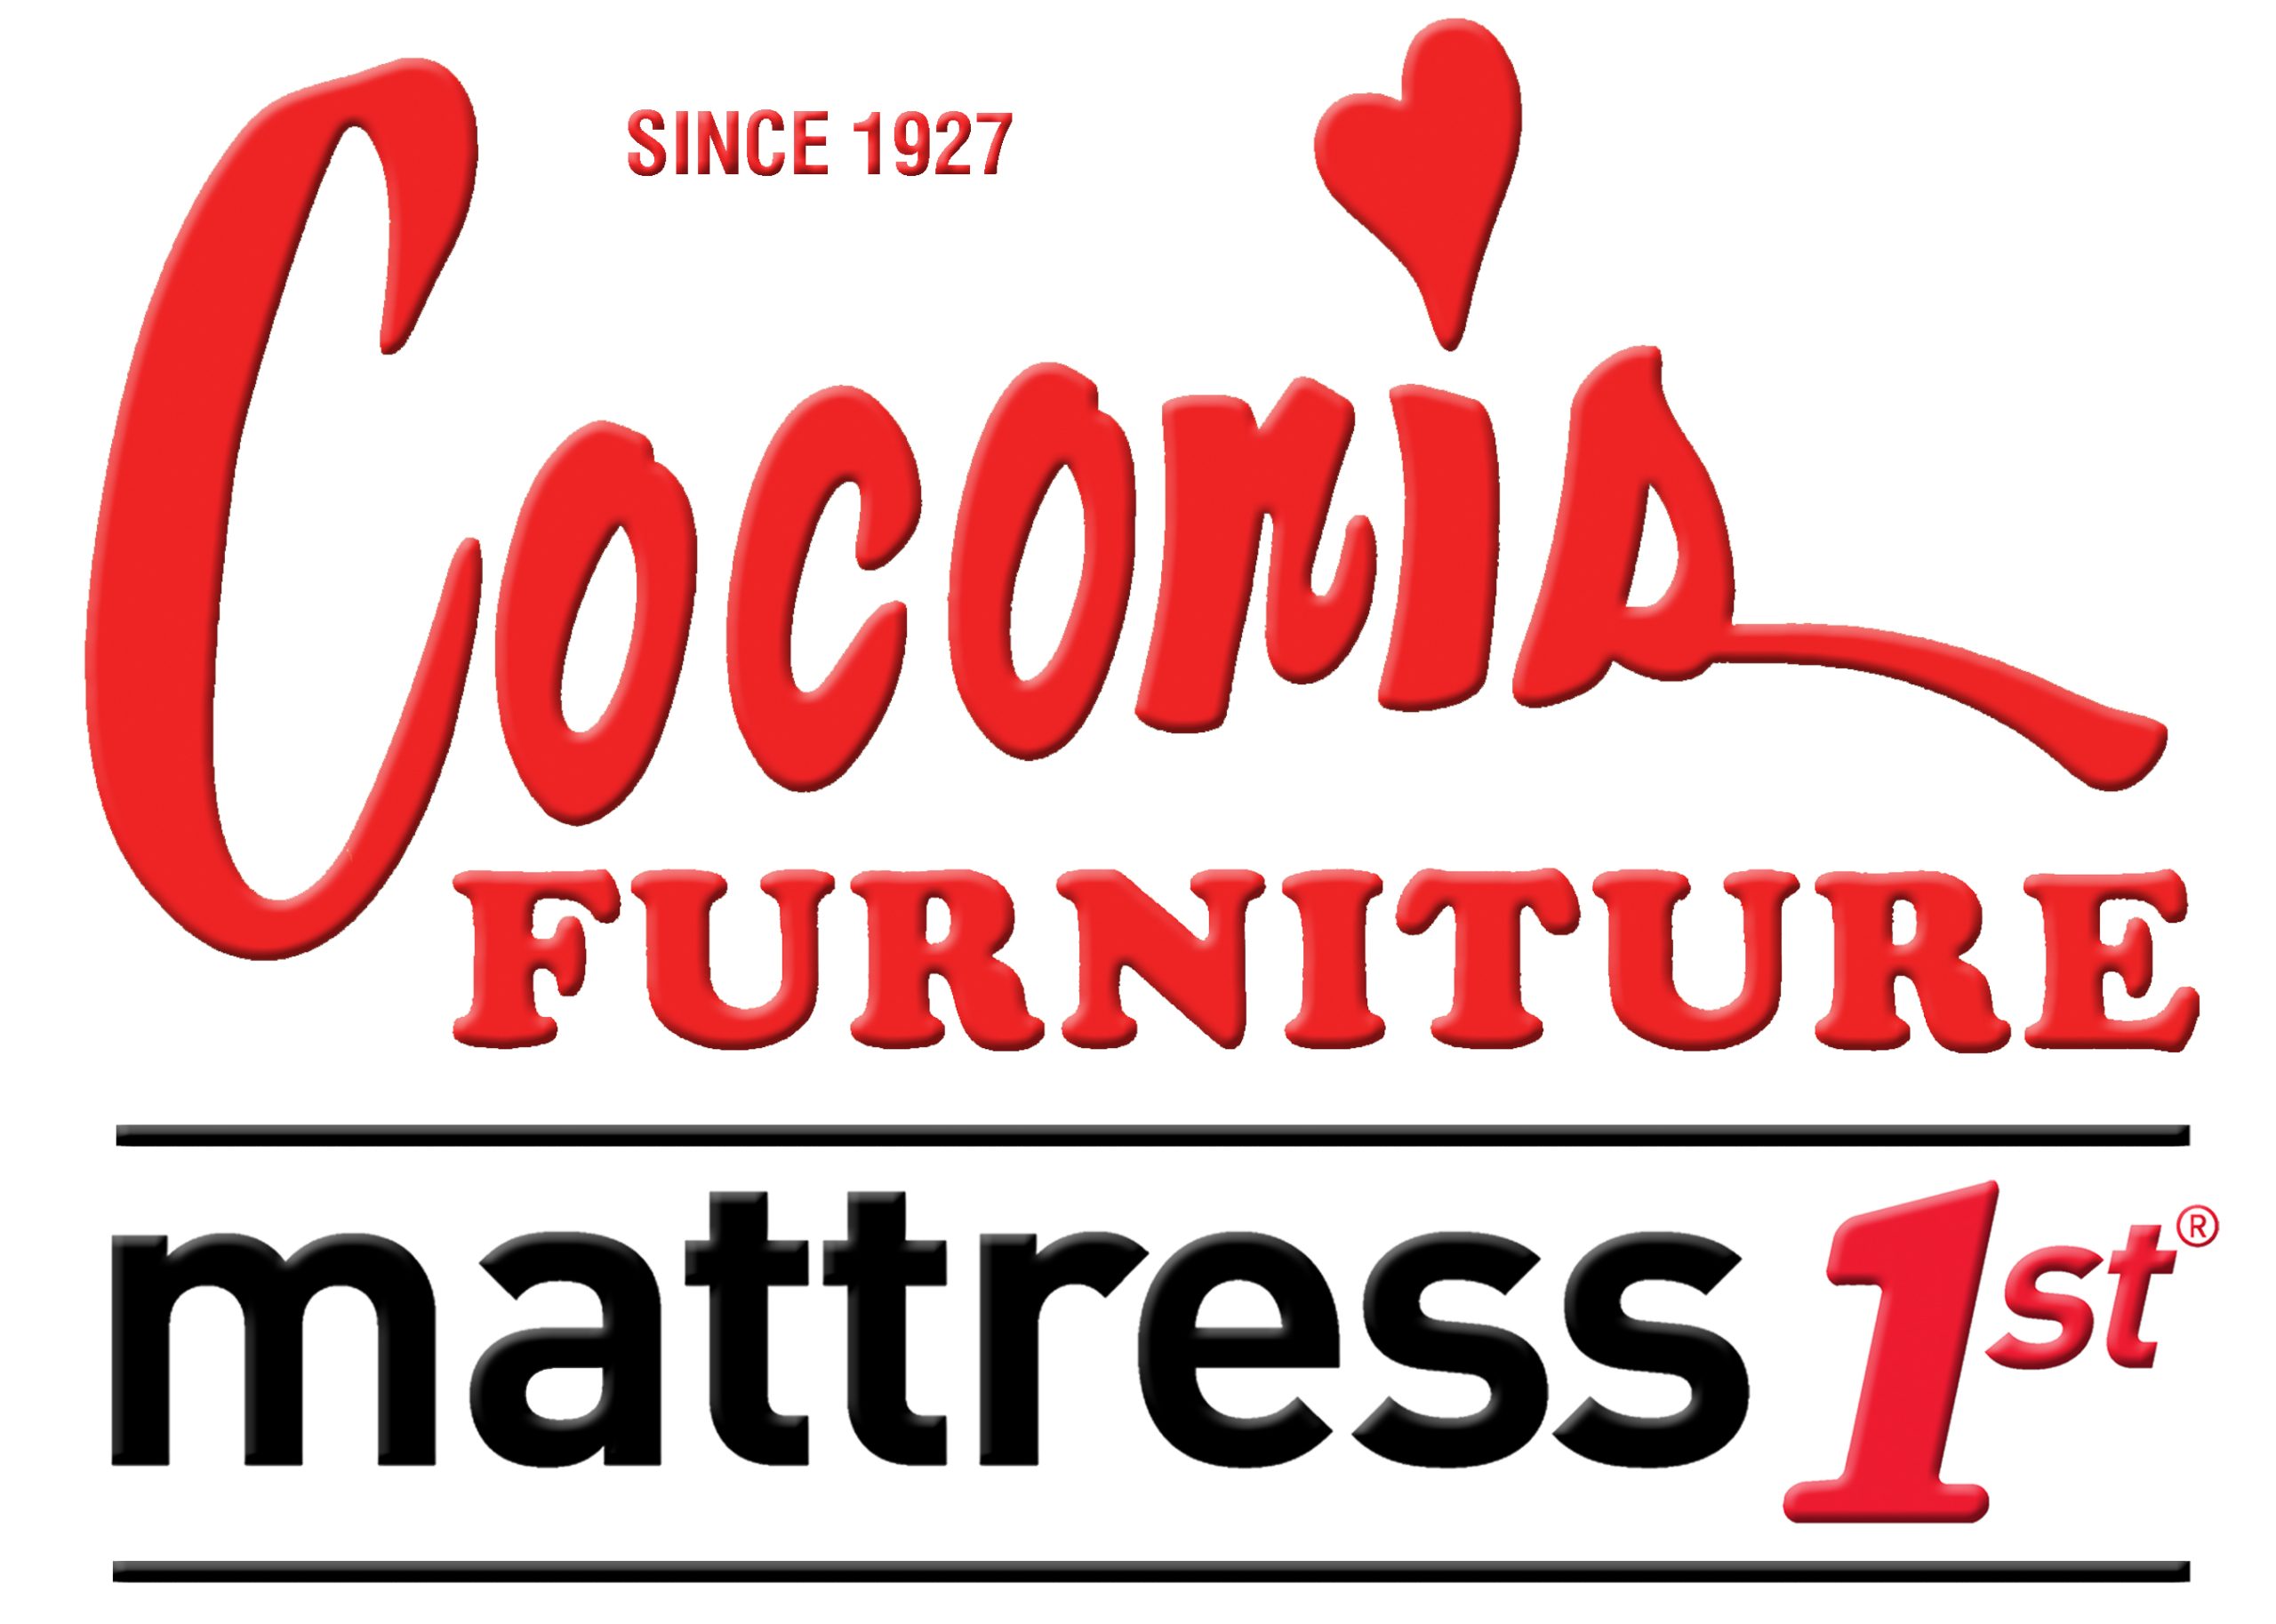 Check out Coconis Furniture & Mattress 1st